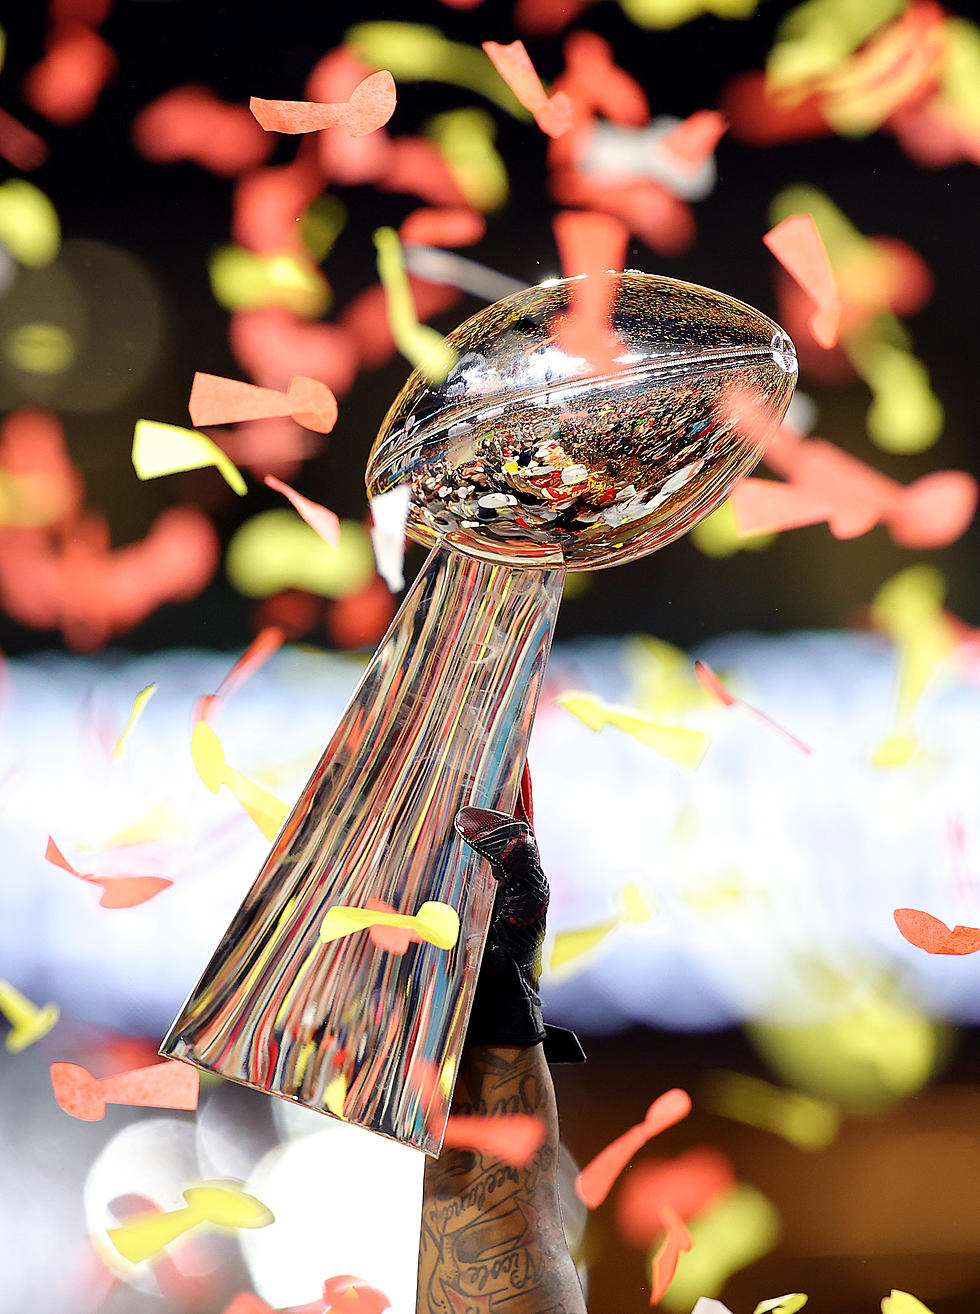 How many times each NFL team has won the Super Bowl